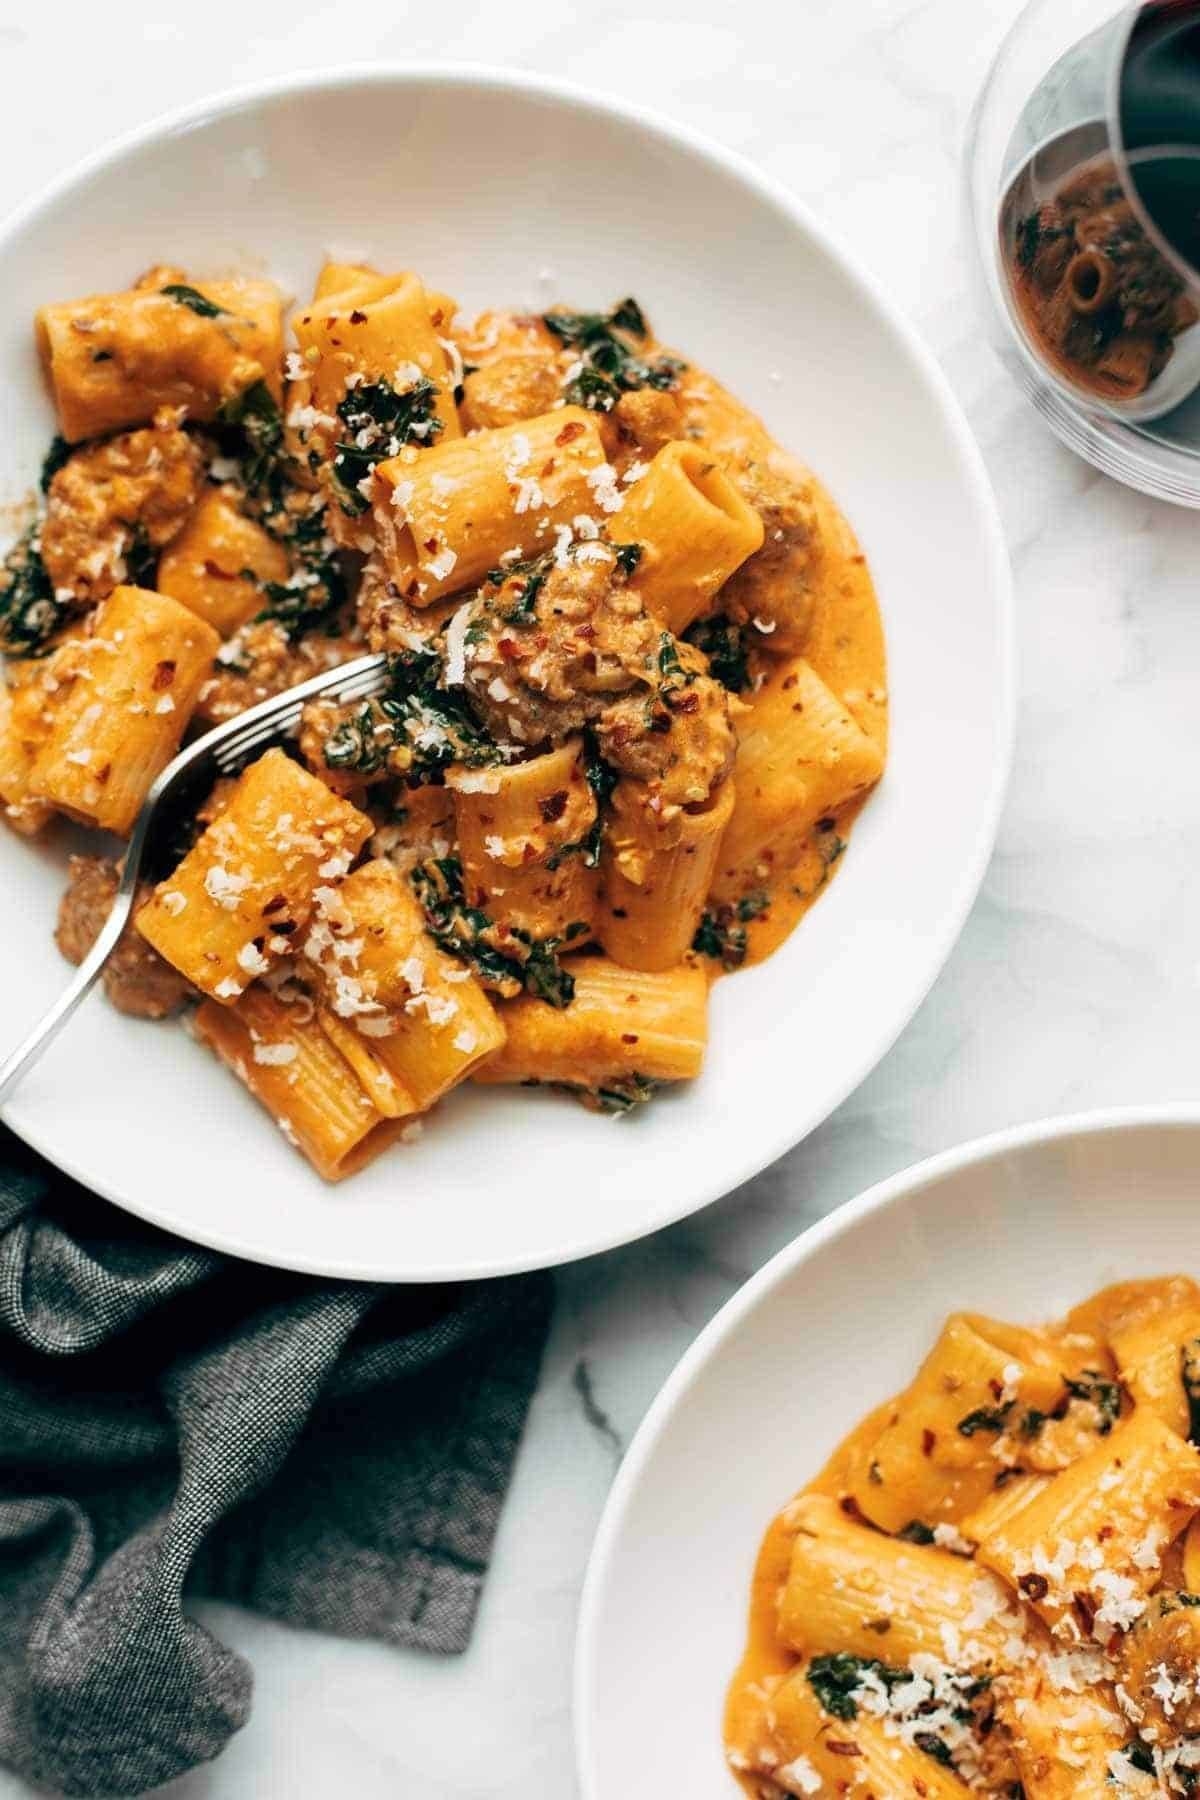 Bowls of Rigatoni with Sausage and Kale